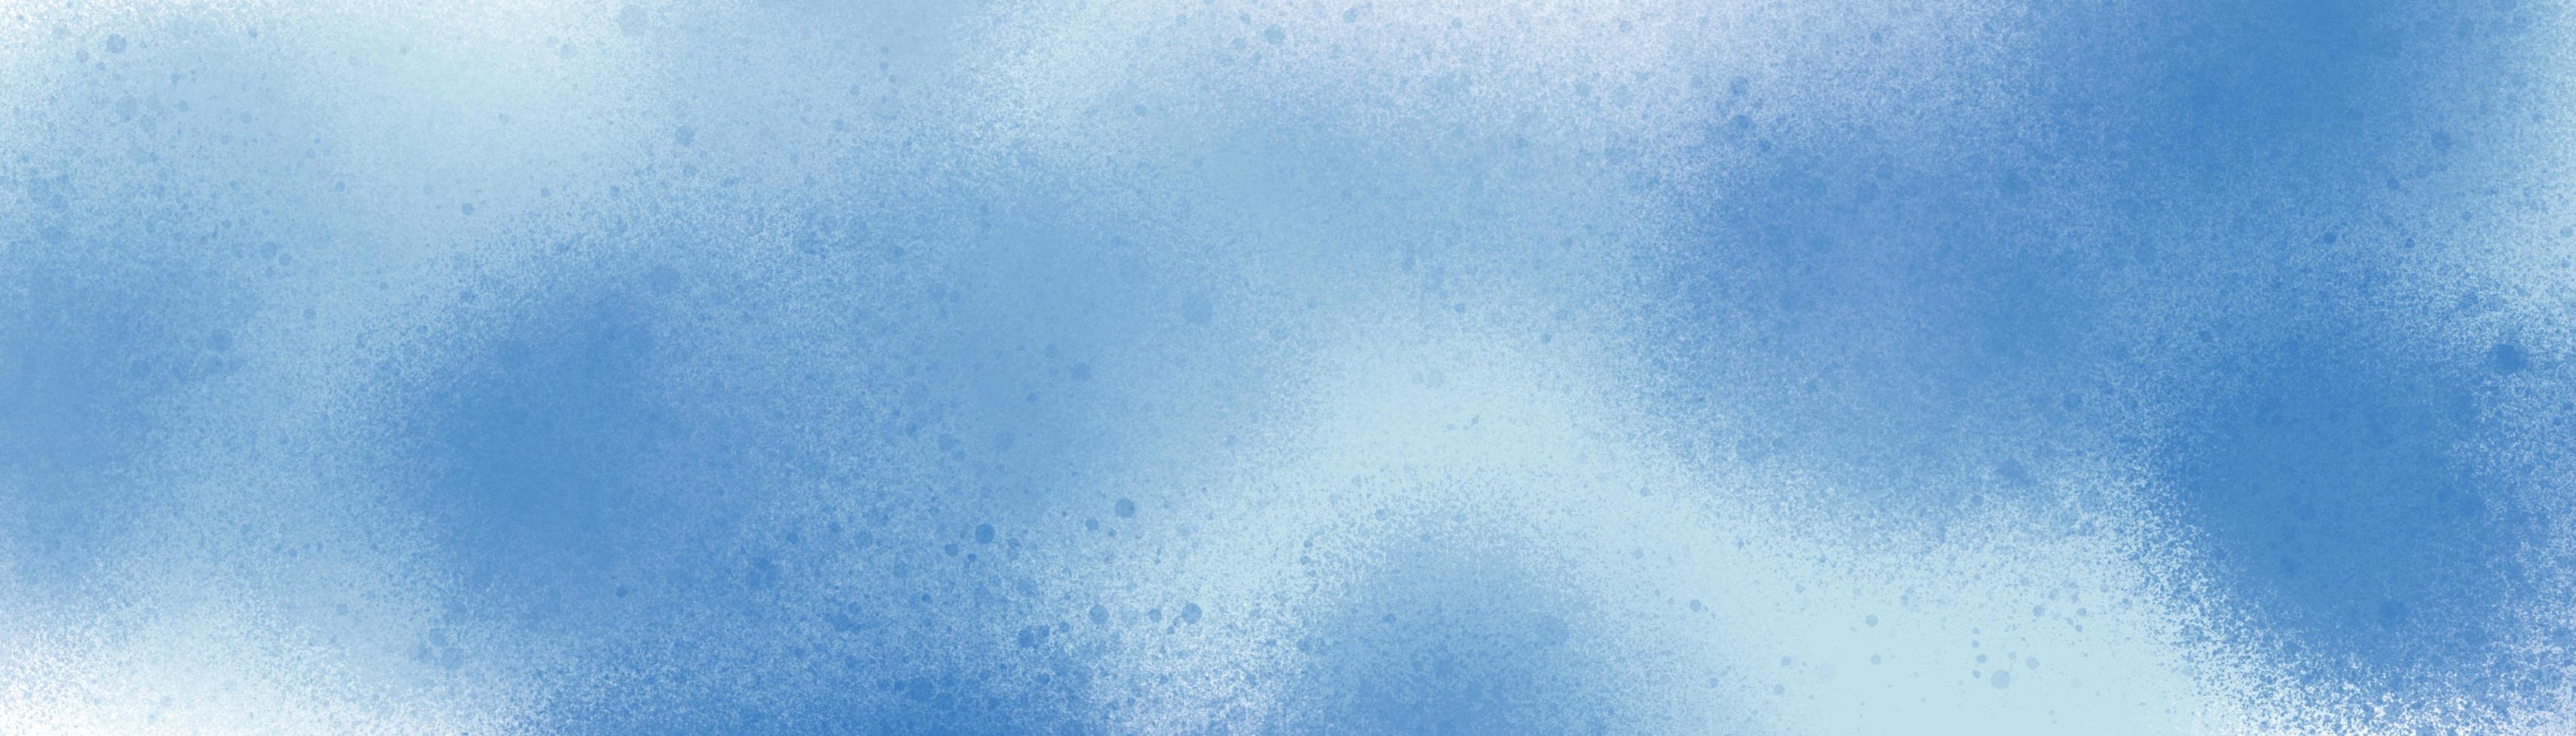 abstract splashes-brush background pattern painted in winter colors. blue and white in dots texture elements for creative design. photo